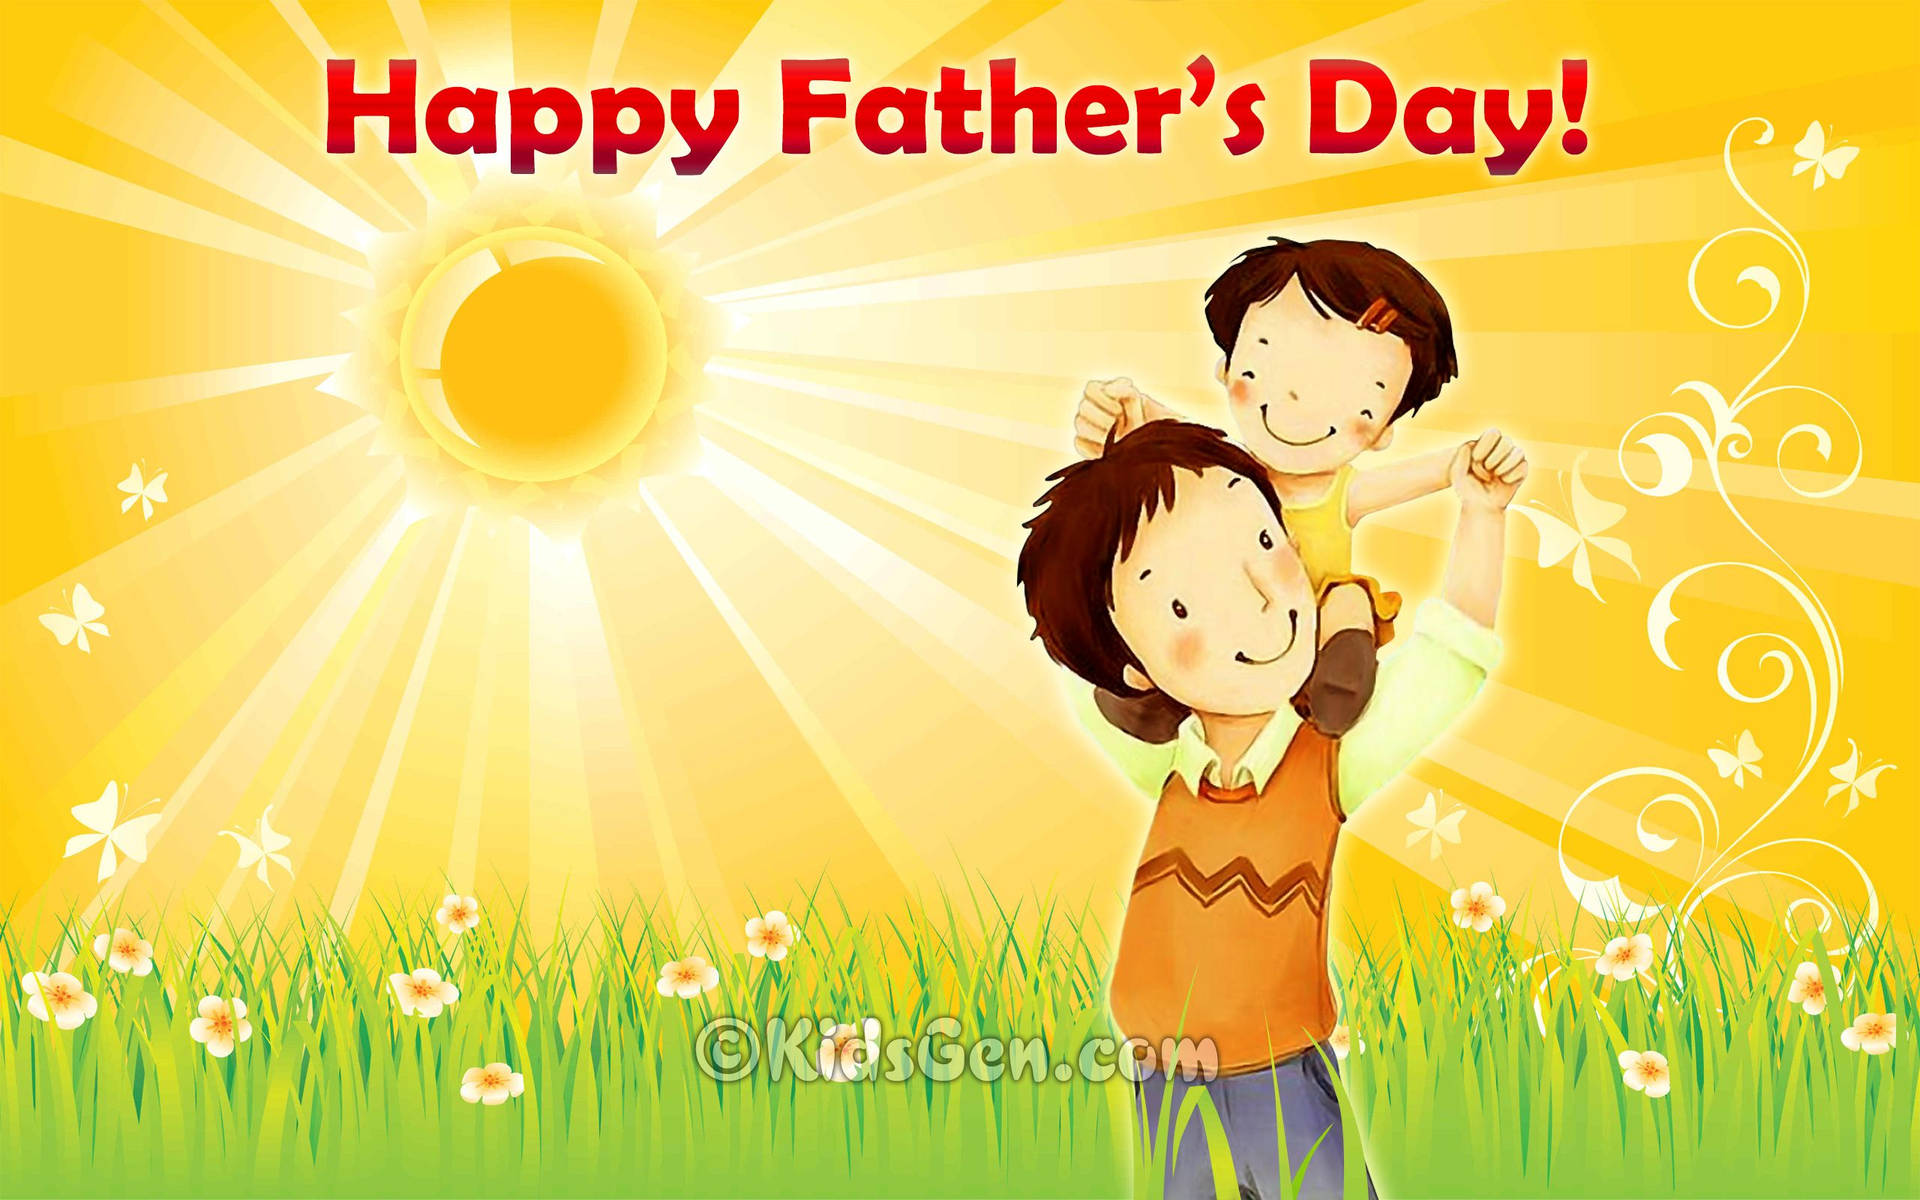 Celebrate Fathers Day with a Sunny Greeting! Wallpaper